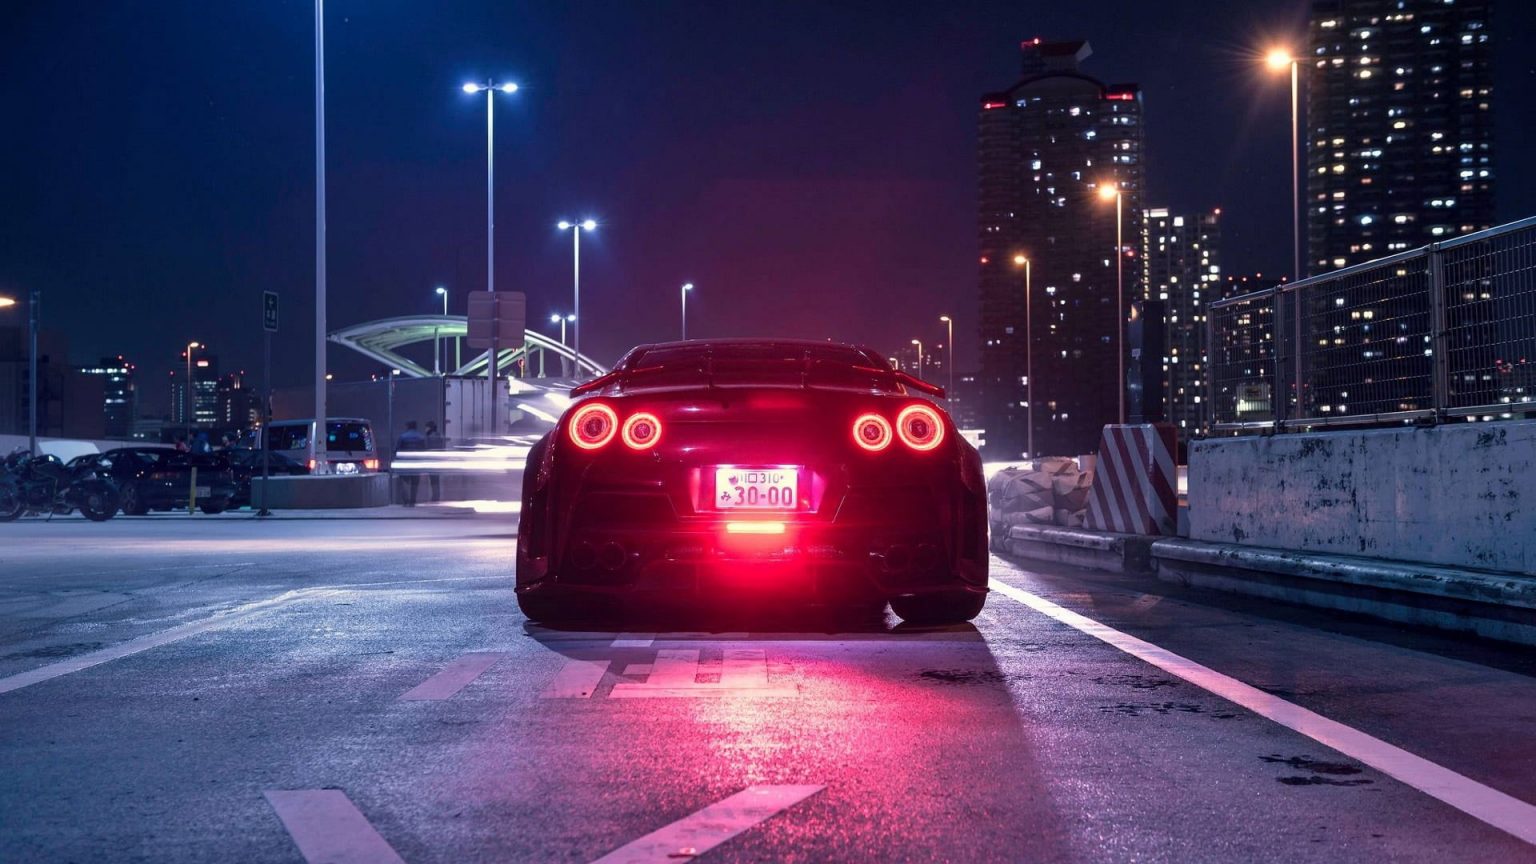 Wallpaper Nissan Gt R, Japanese Cars, Jdm, Night, City • Wallpaper For You